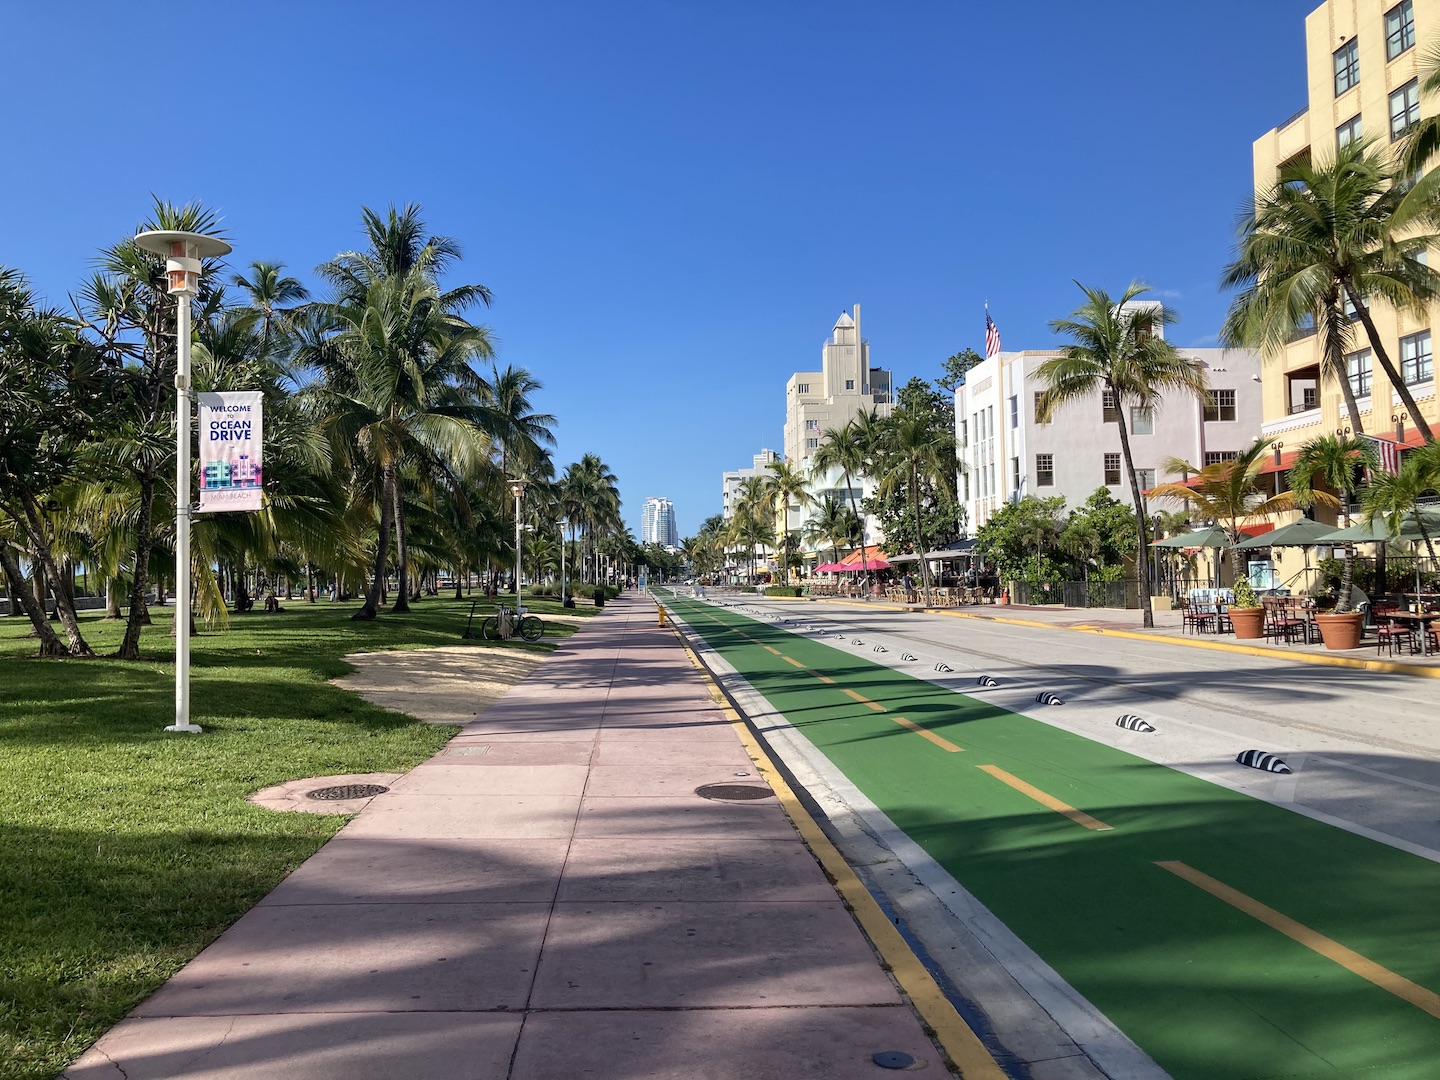 A Few Days in Miami, Florida - The Road We've Traveled